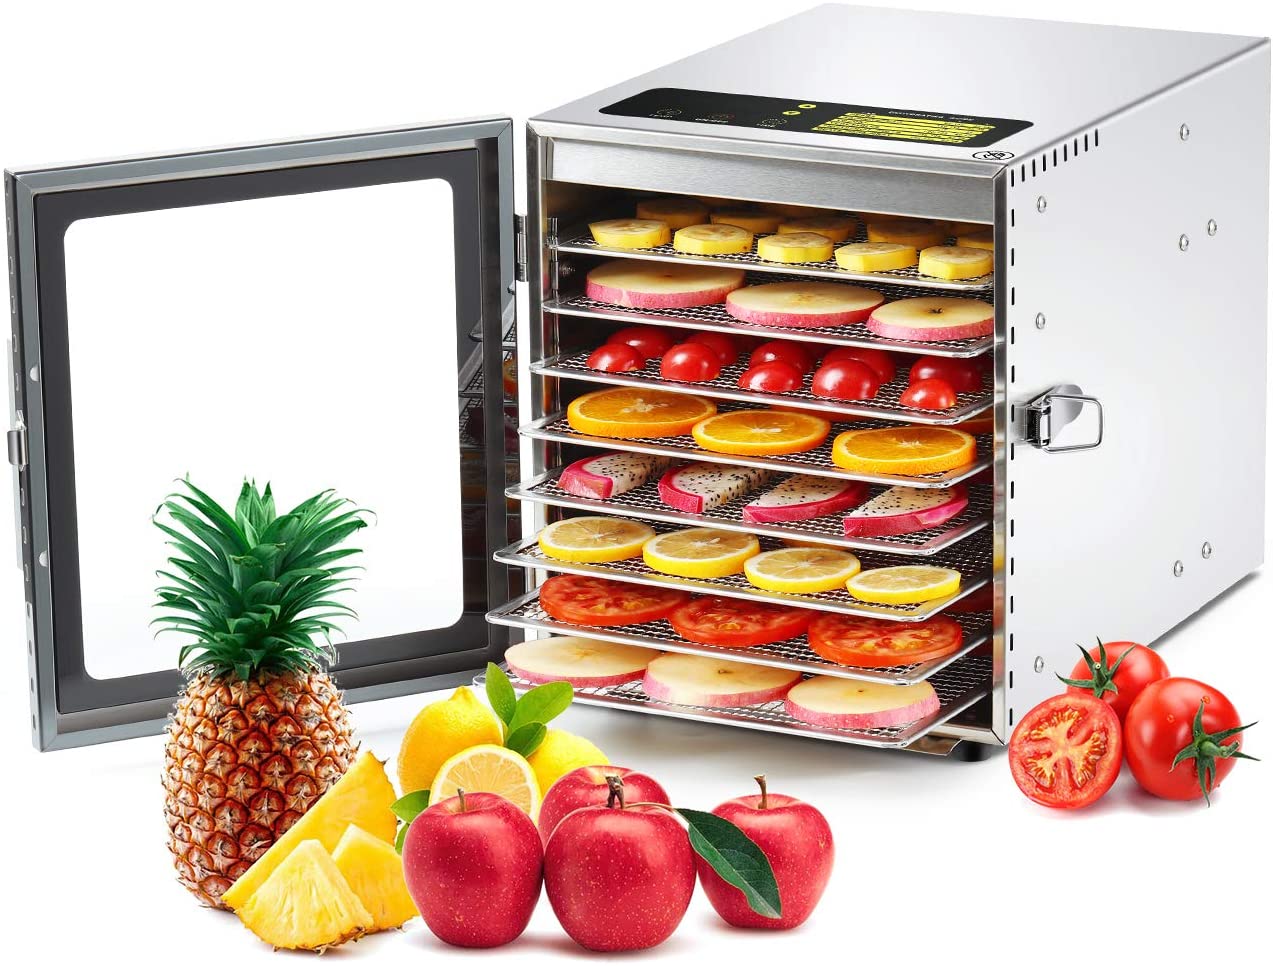 photo of stainless steel dehydrator filled with sliced fruit